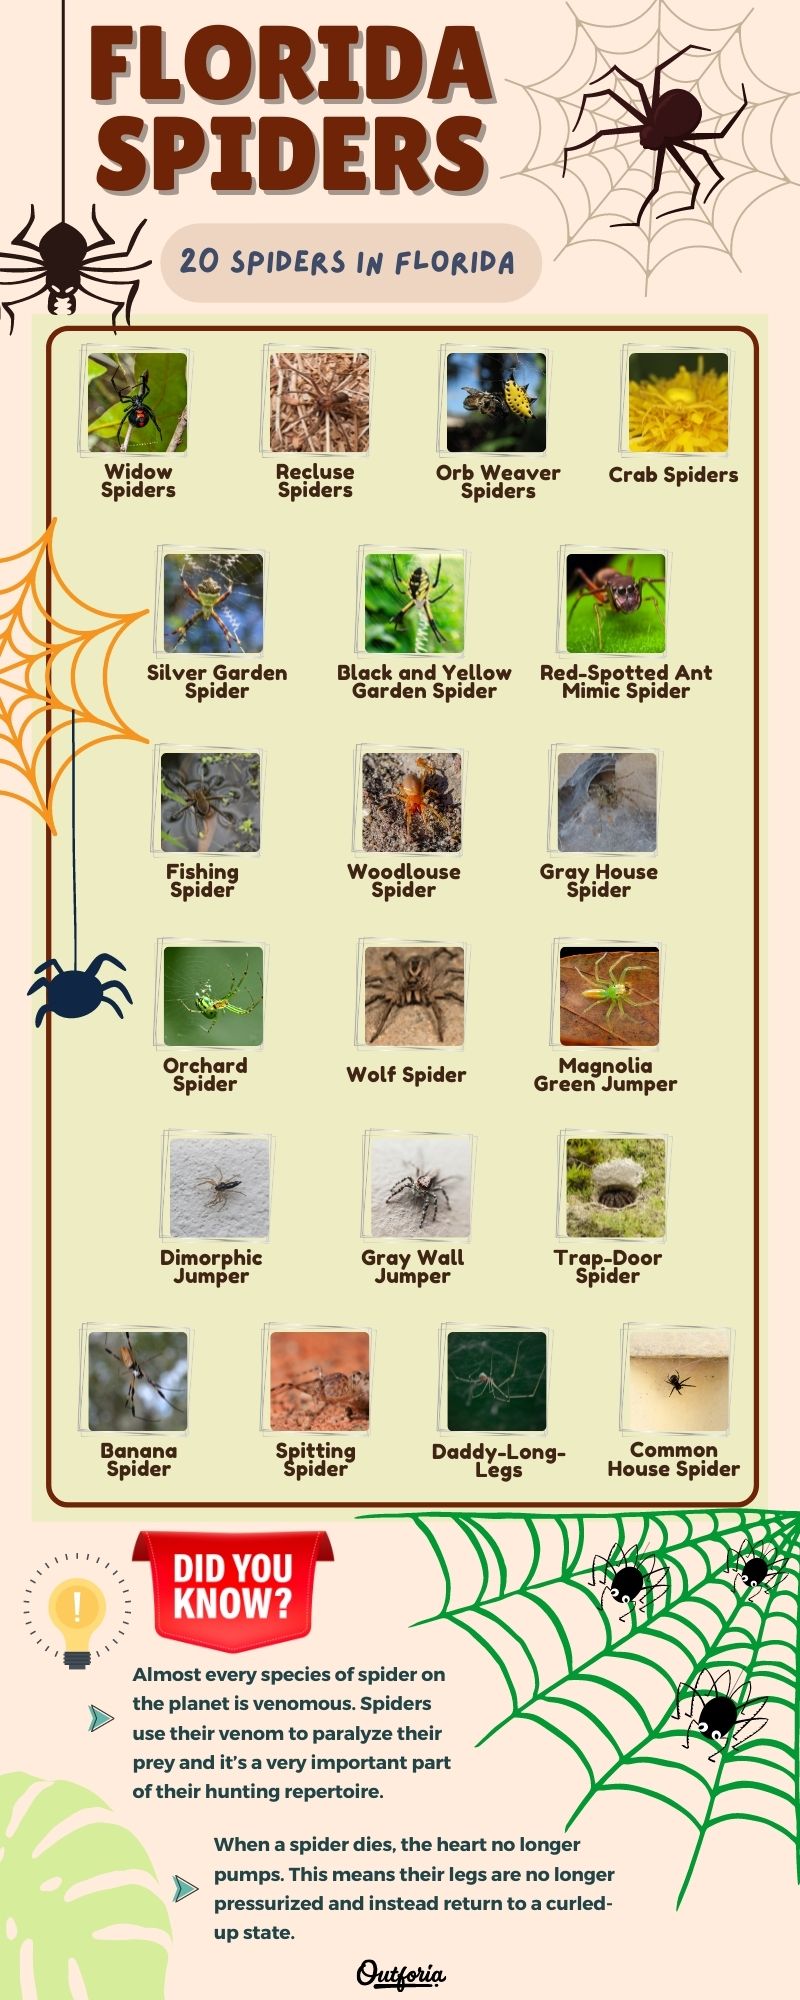 Chart of the different spiders in Florida complete with Facts, Photos, and more!